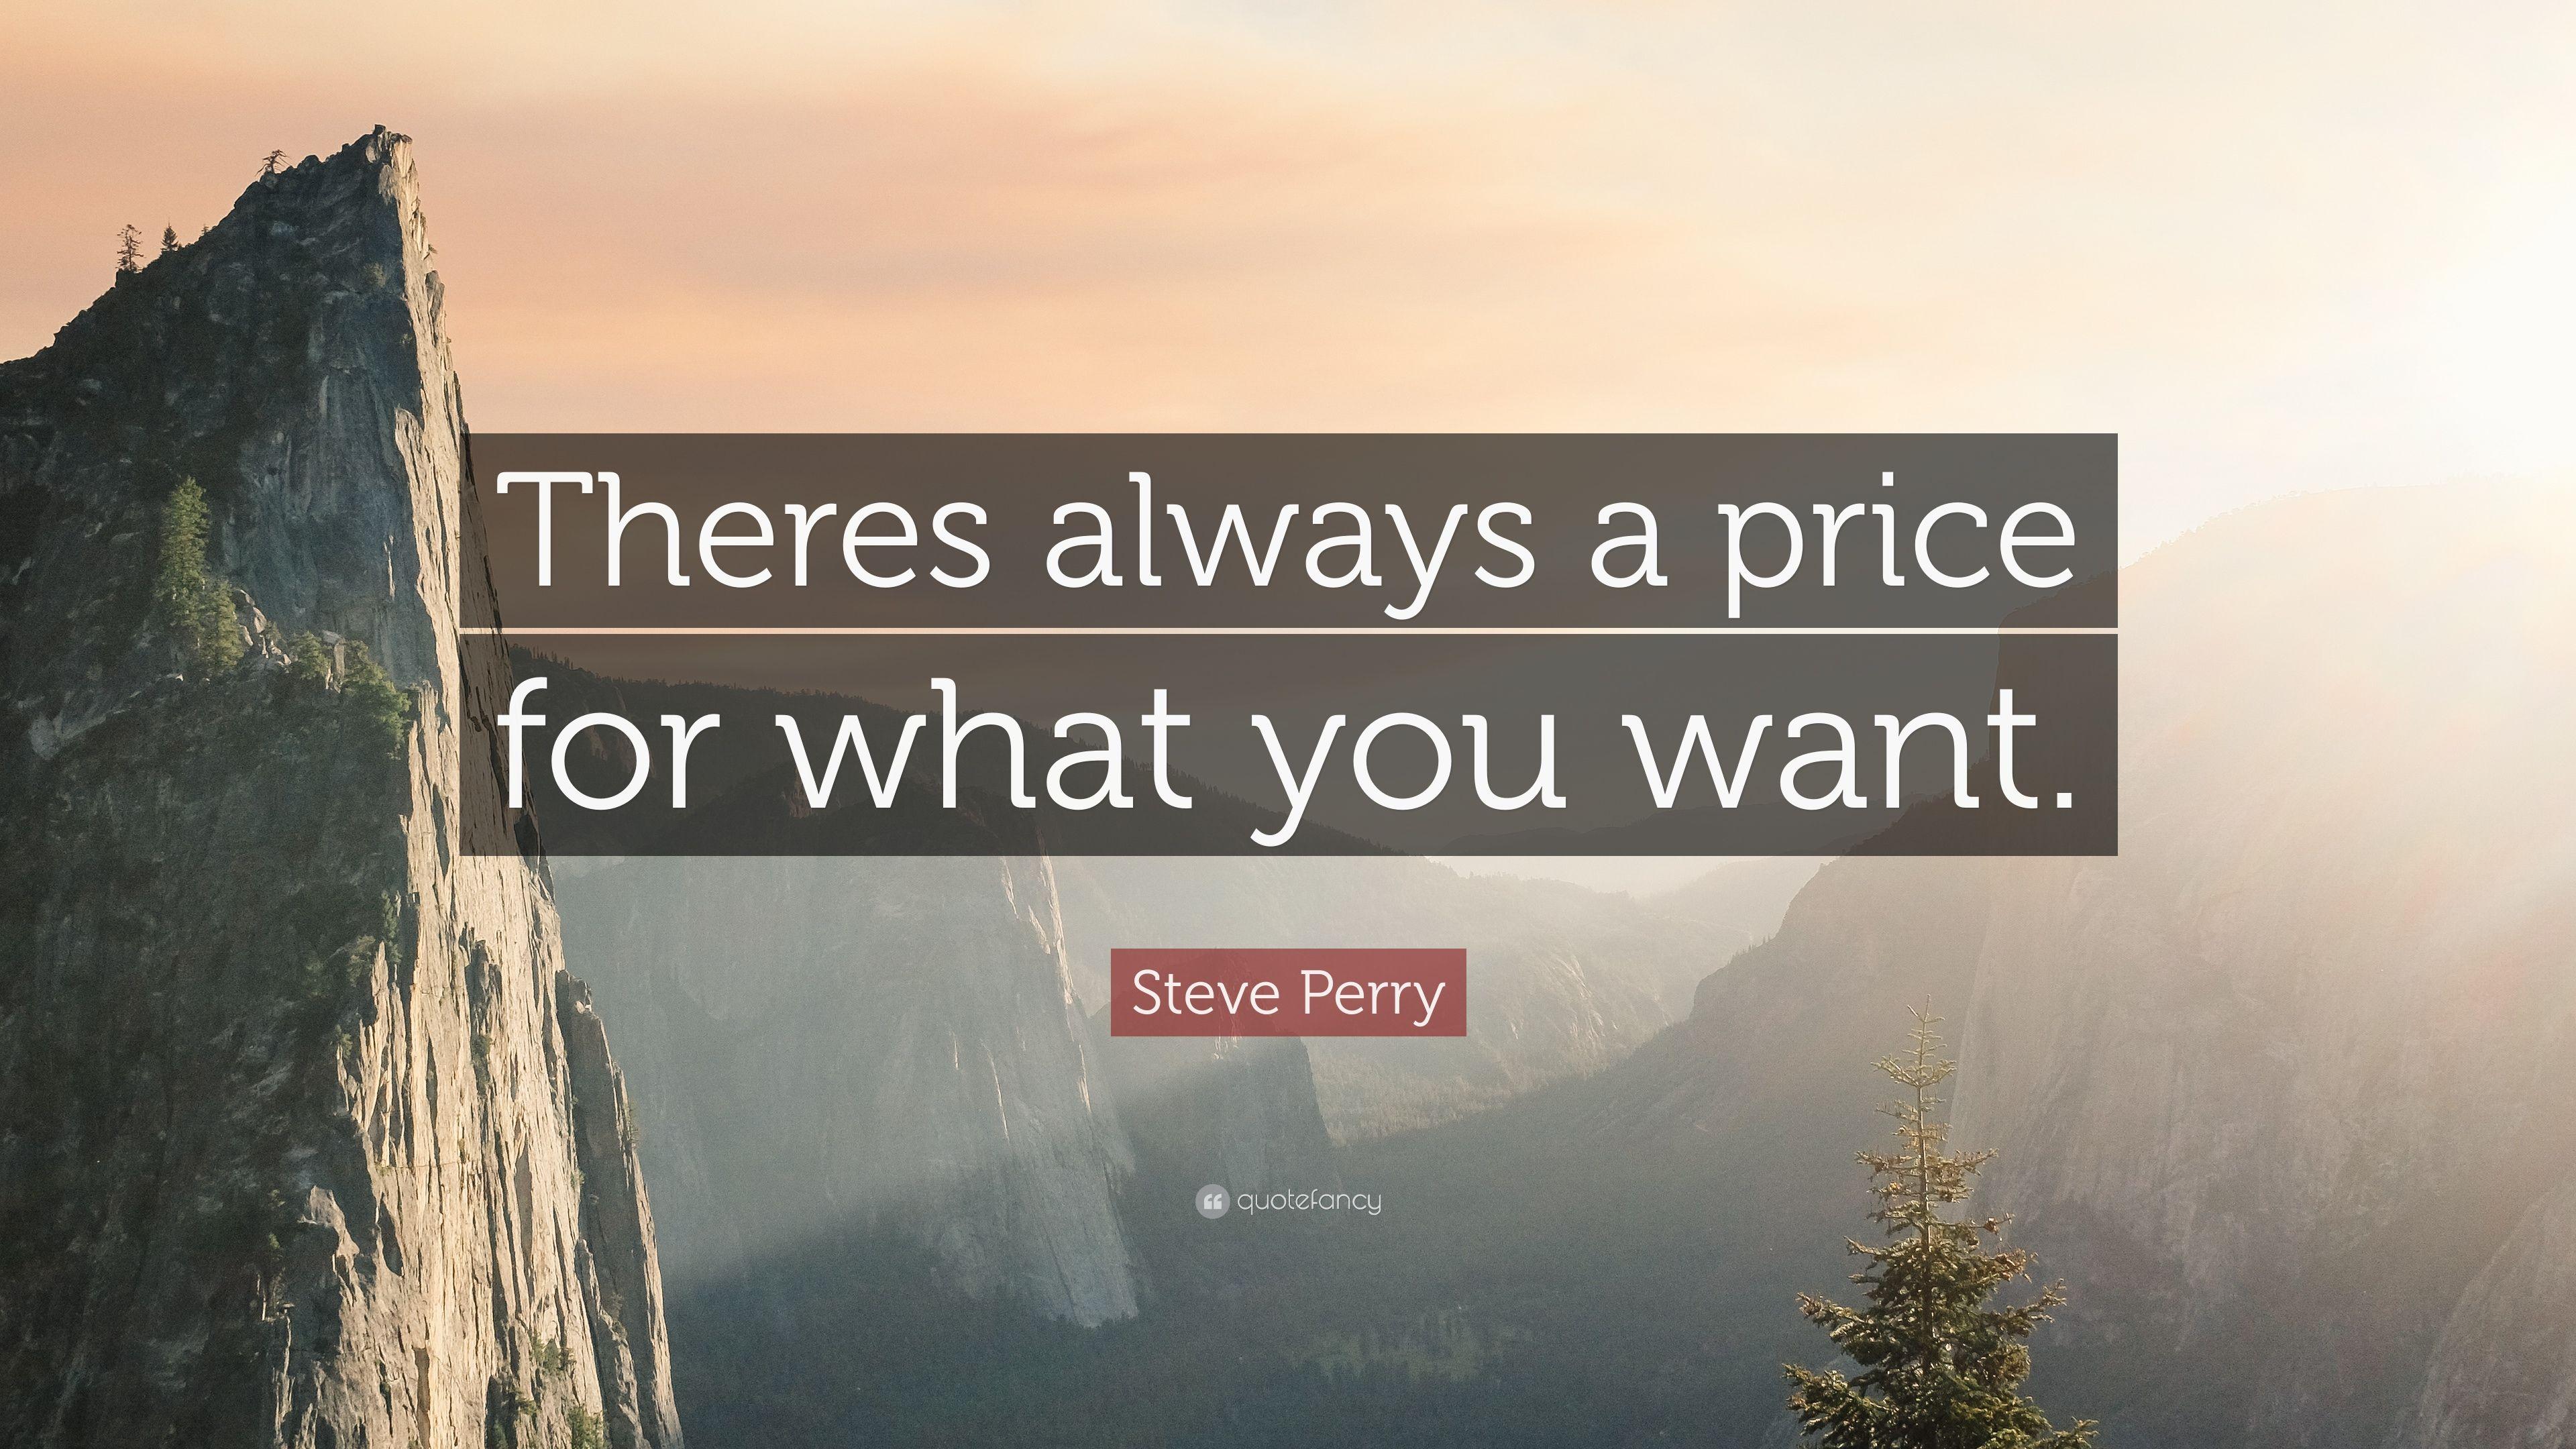 Steve Perry Quote: “Theres always a price for what you want.” 7